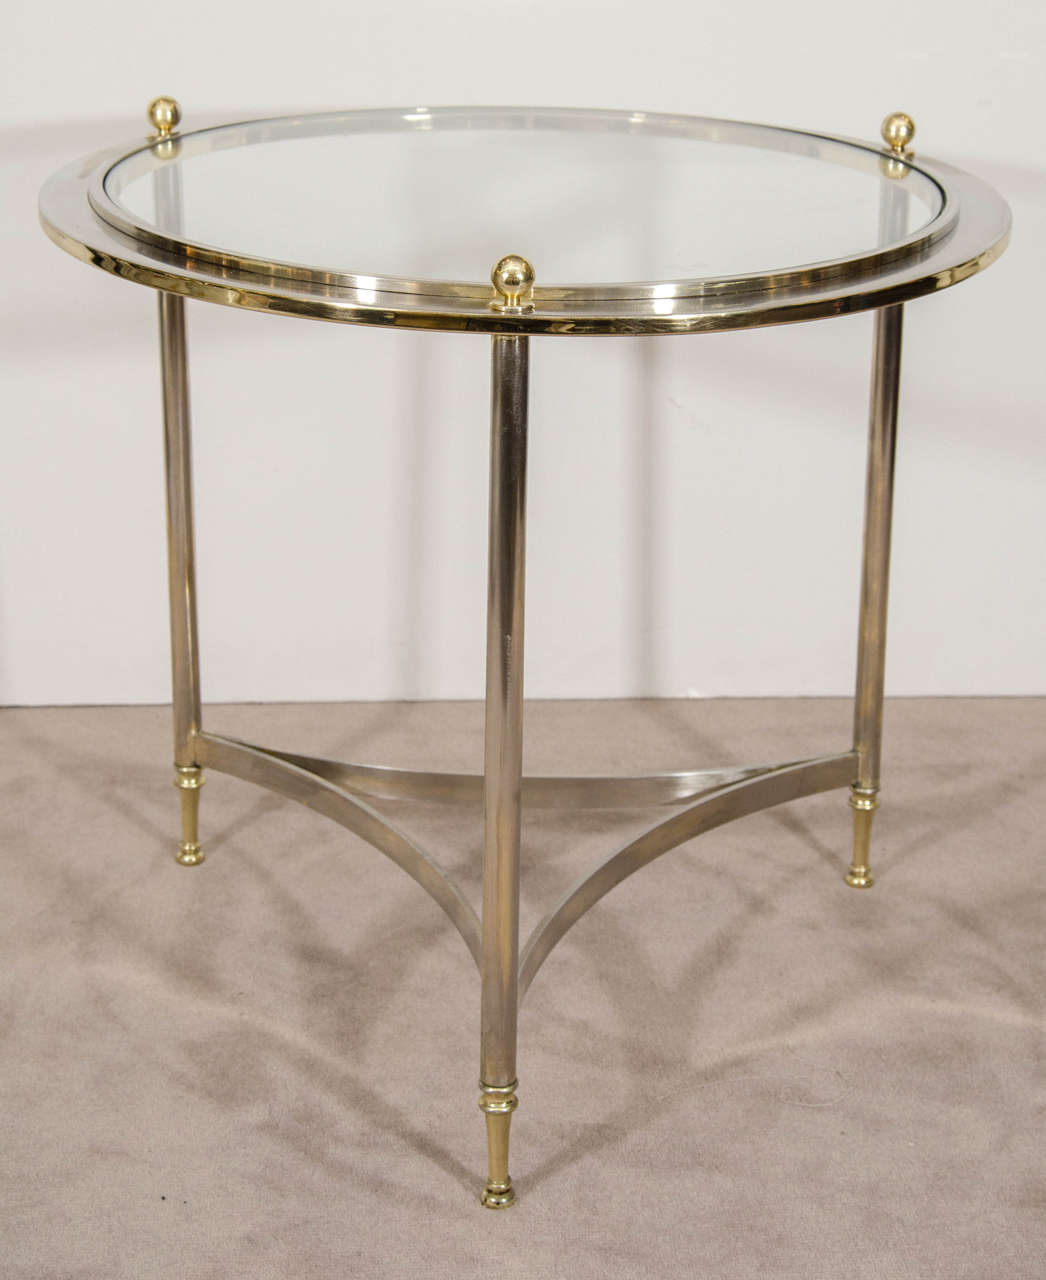 A vintage circular steel table with brass accents and glass top by DIA, Design Institute of America. Good vintage condition with age appropriate wear and patina. A few minor scratches.